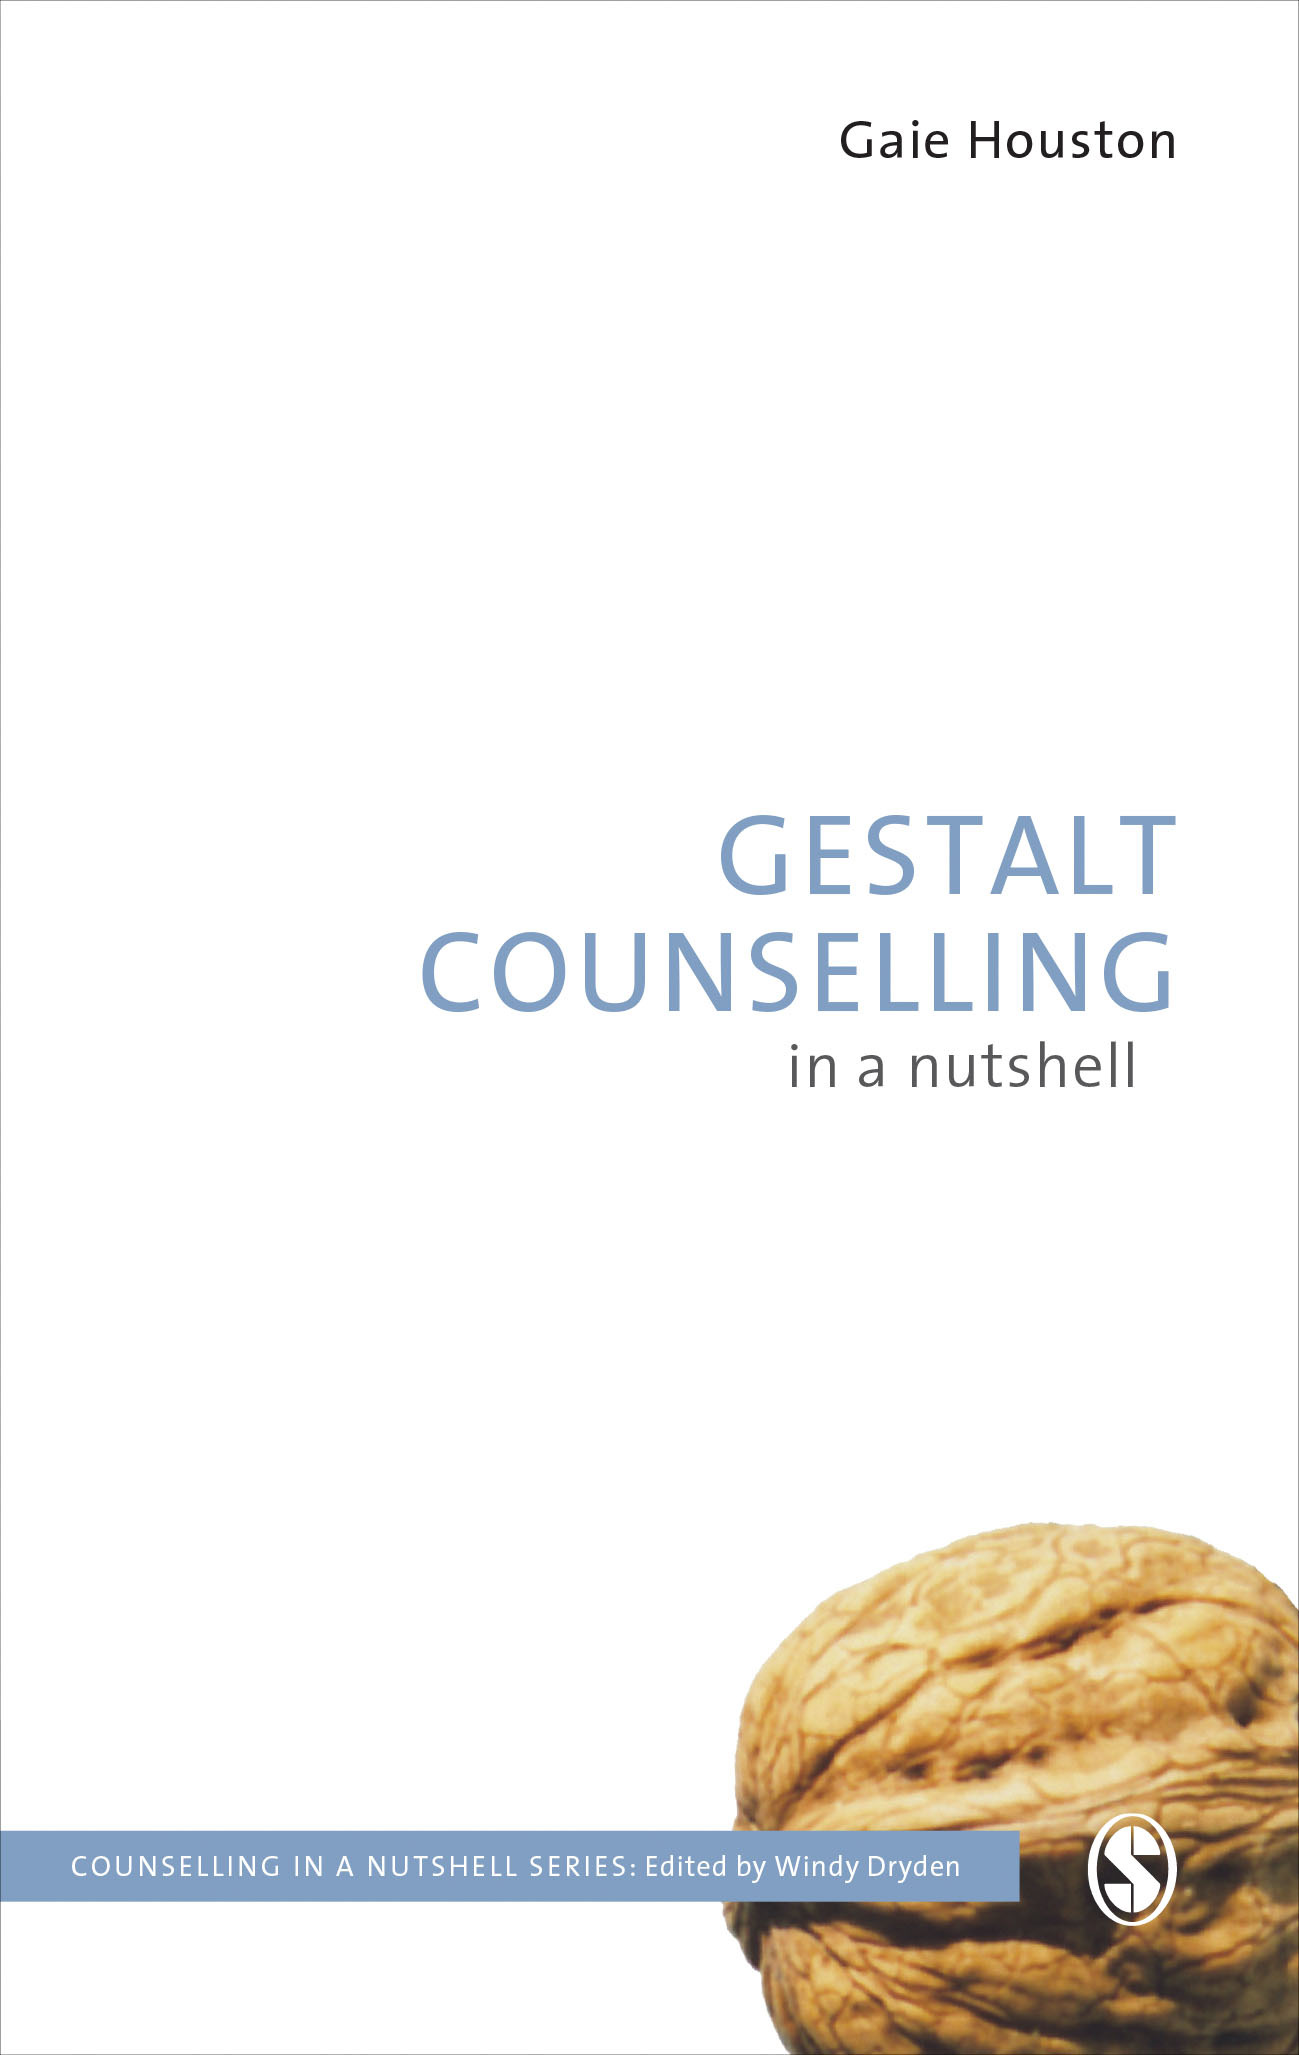 Gestalt Counselling in a nutshell book cover image